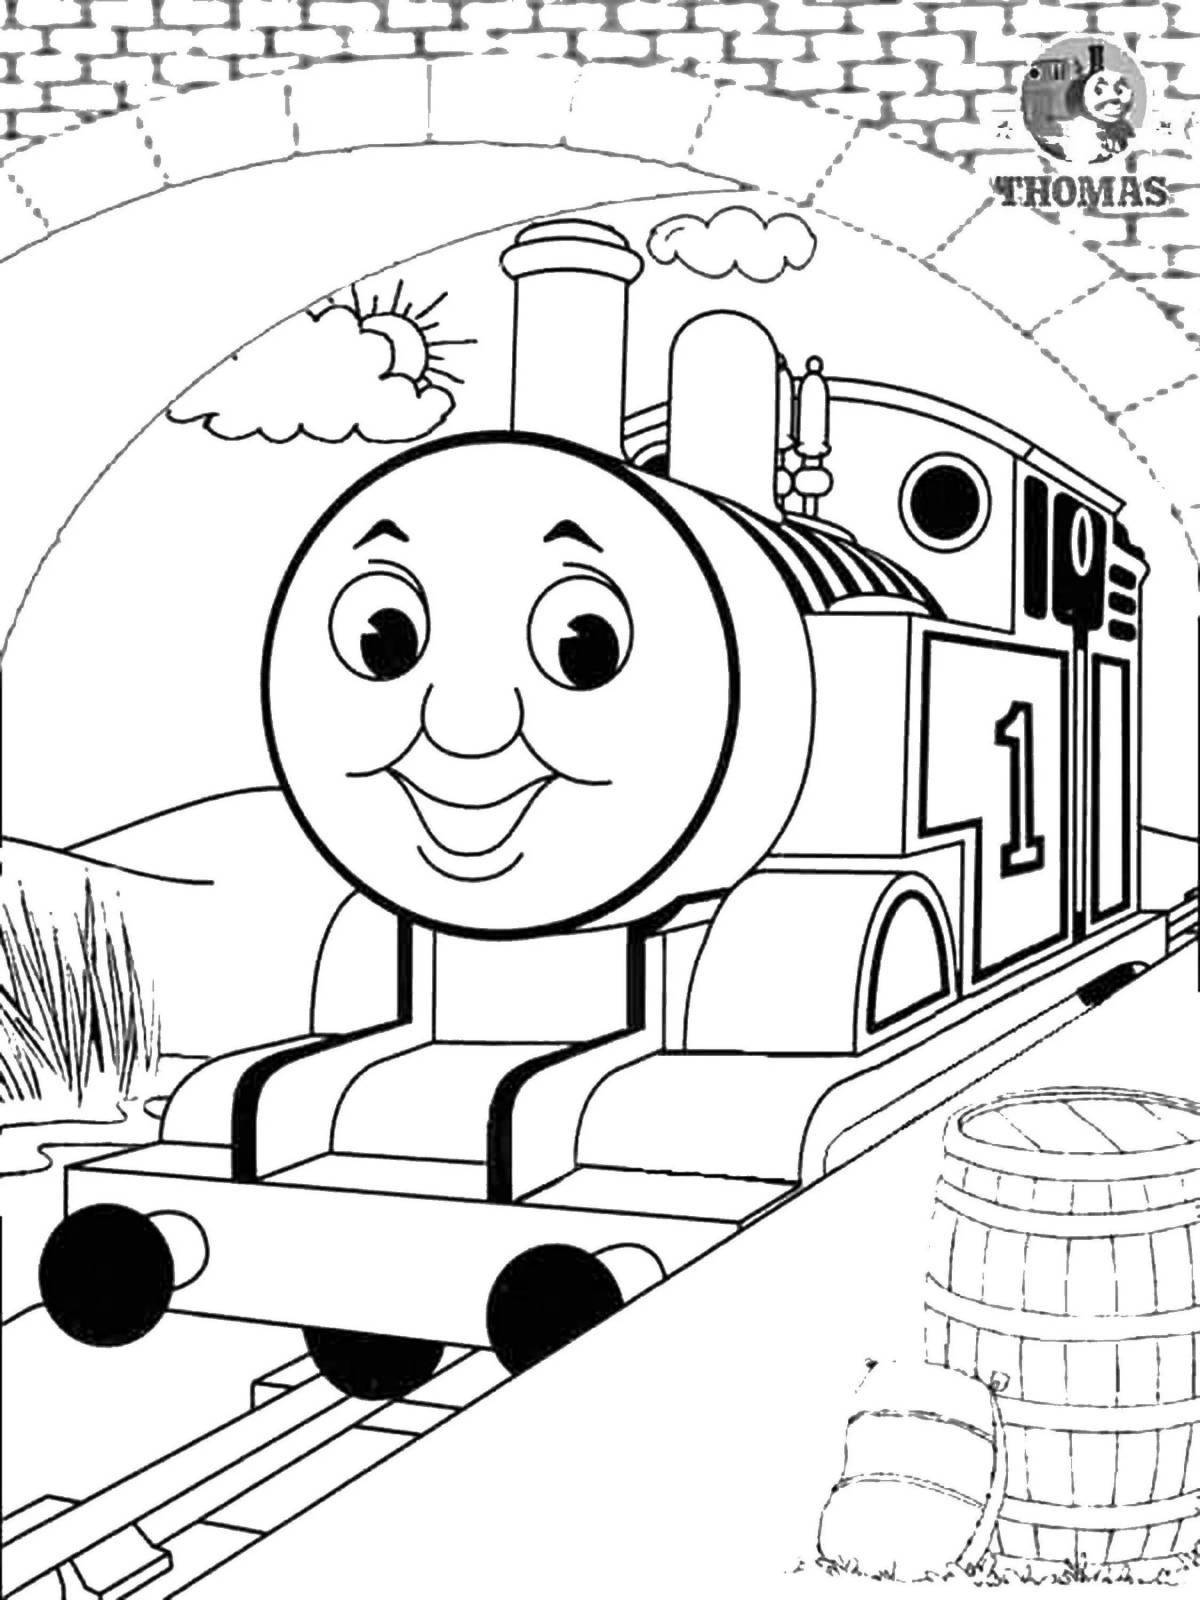 Animated scary thomas the tank engine coloring book